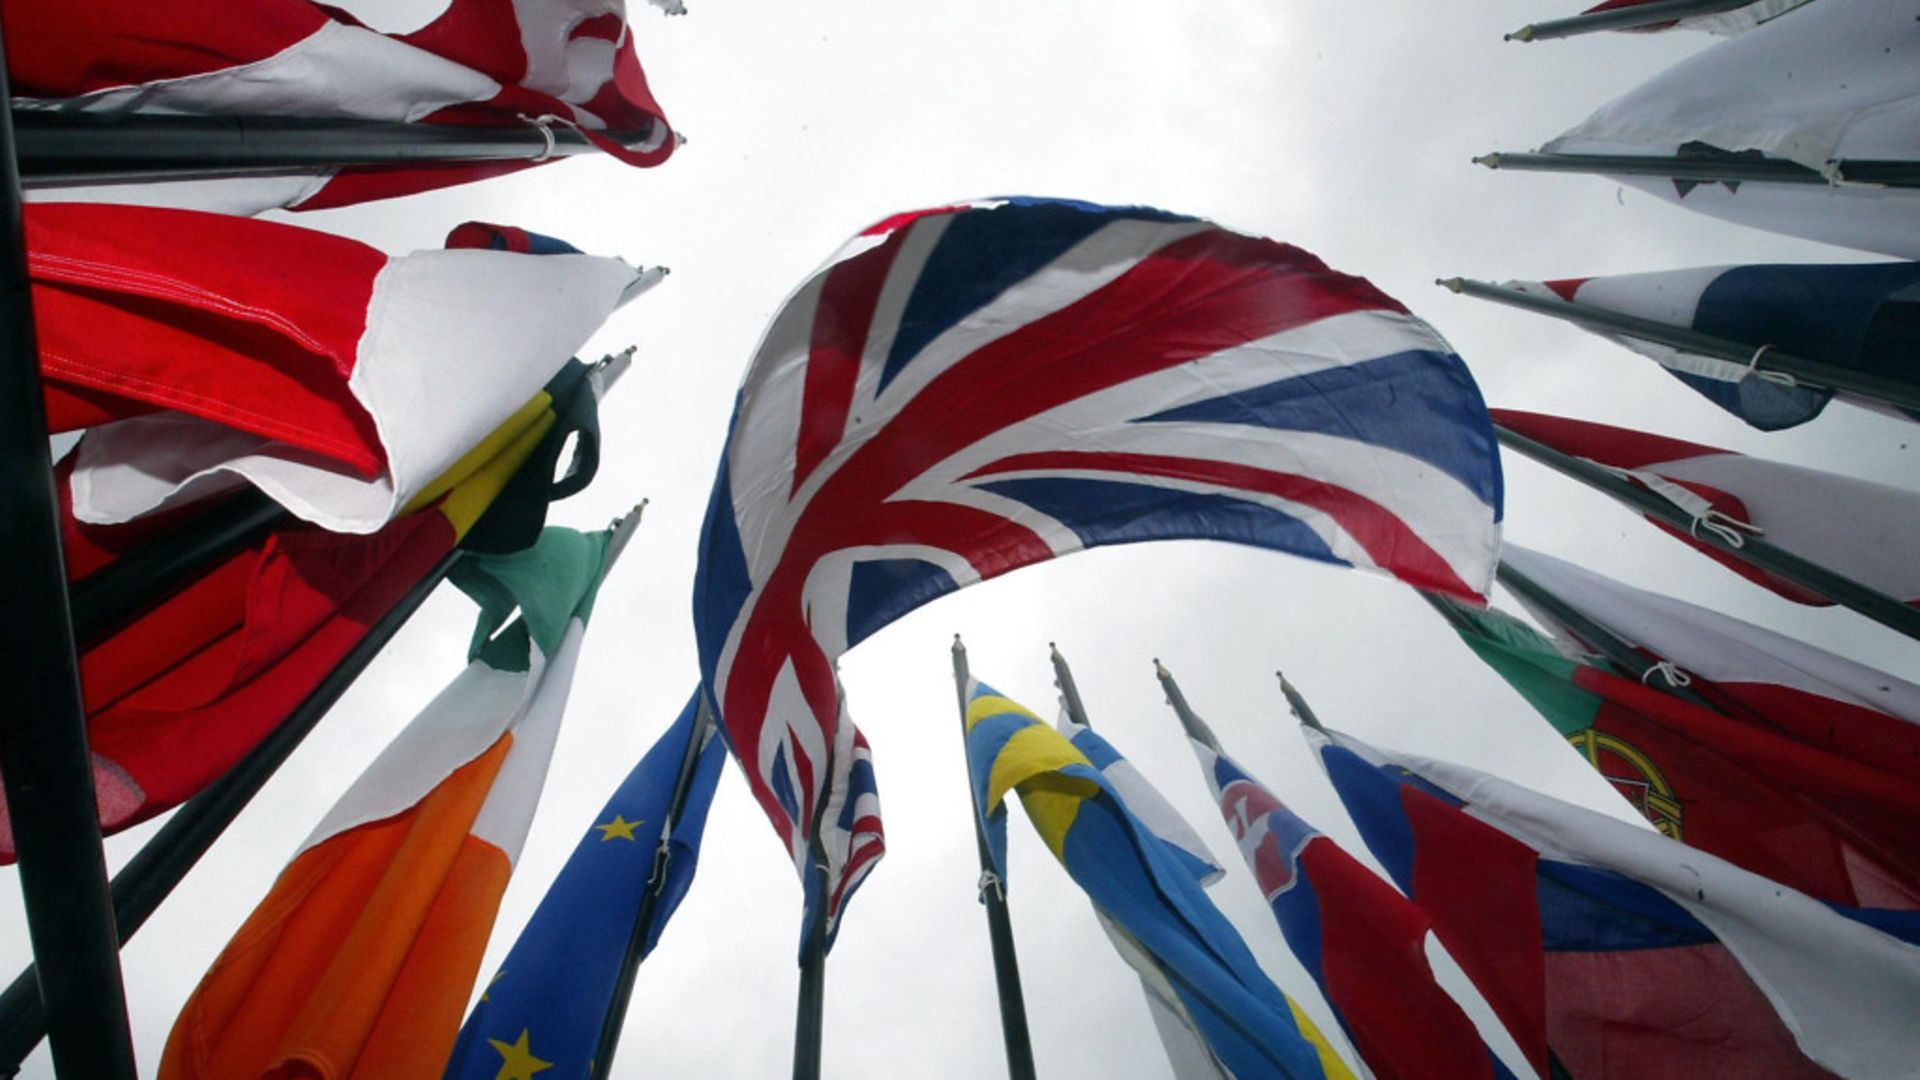 Flags of the world. Photo: PA Archive/PA Images